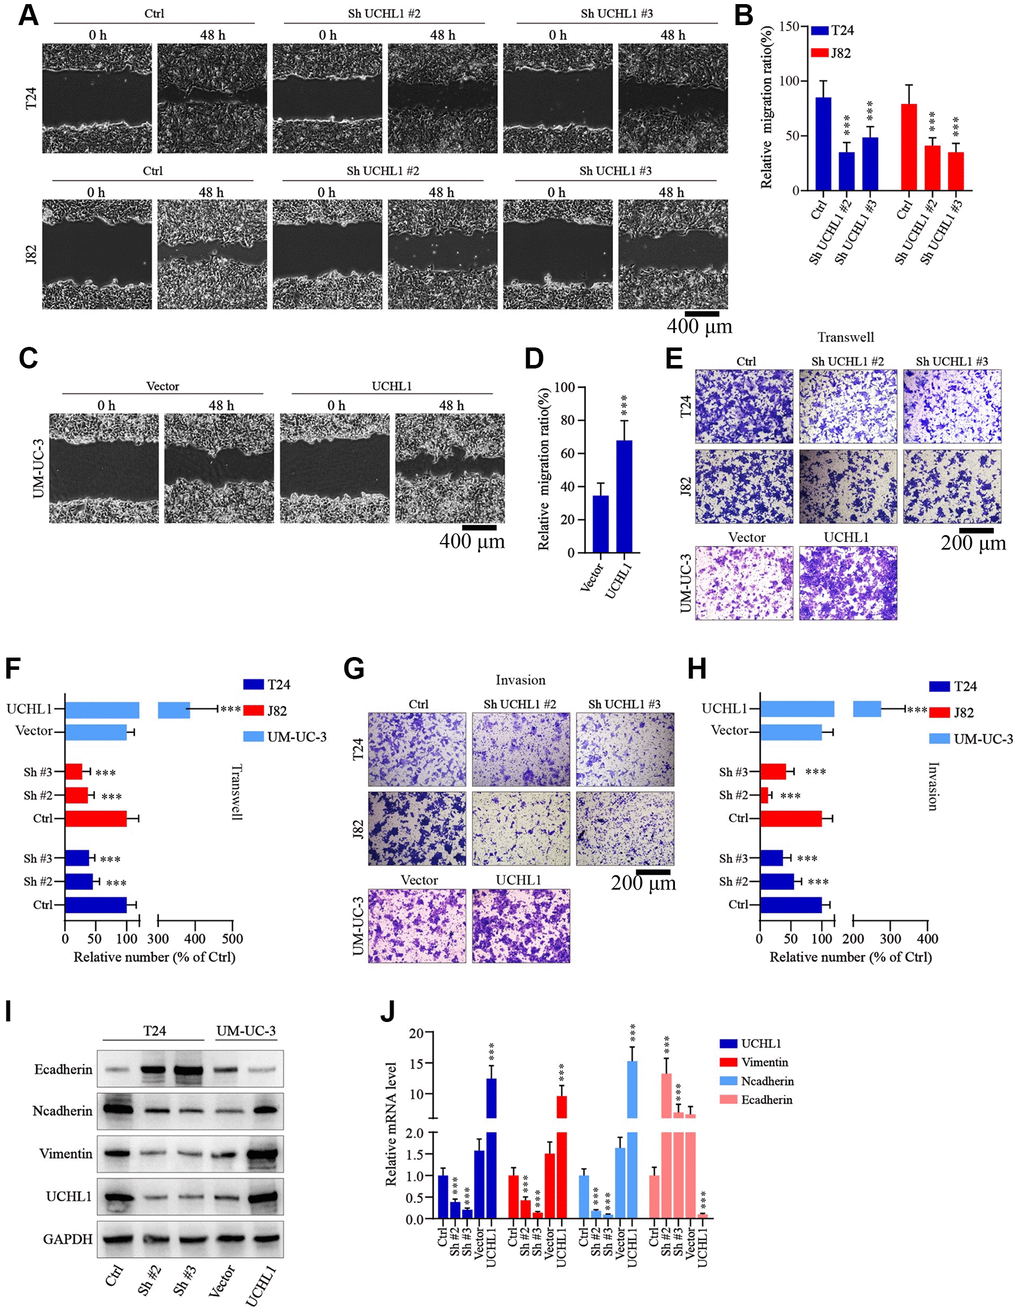 UCHL1 promotes the motility capacity of UBC cells in vitro. (A–D) Wound healing assay to investigate the influences of UCHL1 expression modulation on UBC tumor cell motility. Relative migration ratio of each cell group was statistically compared in bar charts (n = 3). (E–H) Transwell and cellular invasion assay to detect the impact of UCHL1 modulation on UBC tumor cell migration and invasion capabilities. Relative number of migrated or invaded cells of each group was statistically compared in bar charts (n = 3). (I, J) WB/qRT-PCR quantification of EMT biomarkers (E-cadherin, N-cadherin, Vimentin) in UBC cell groups transfected with UCHL1 shRNAs or overexpression vectors (n = 3).